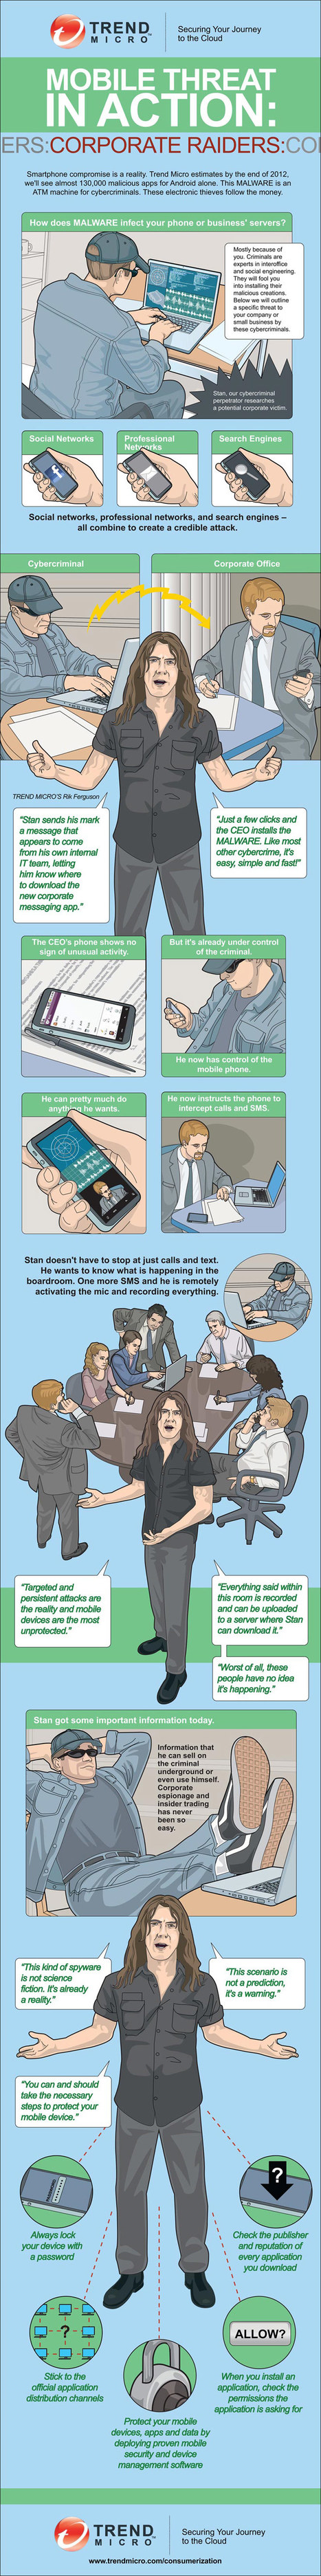 Mobile Threat in Action [INFOGRAPHIC] | 21st Century Learning and Teaching | Scoop.it